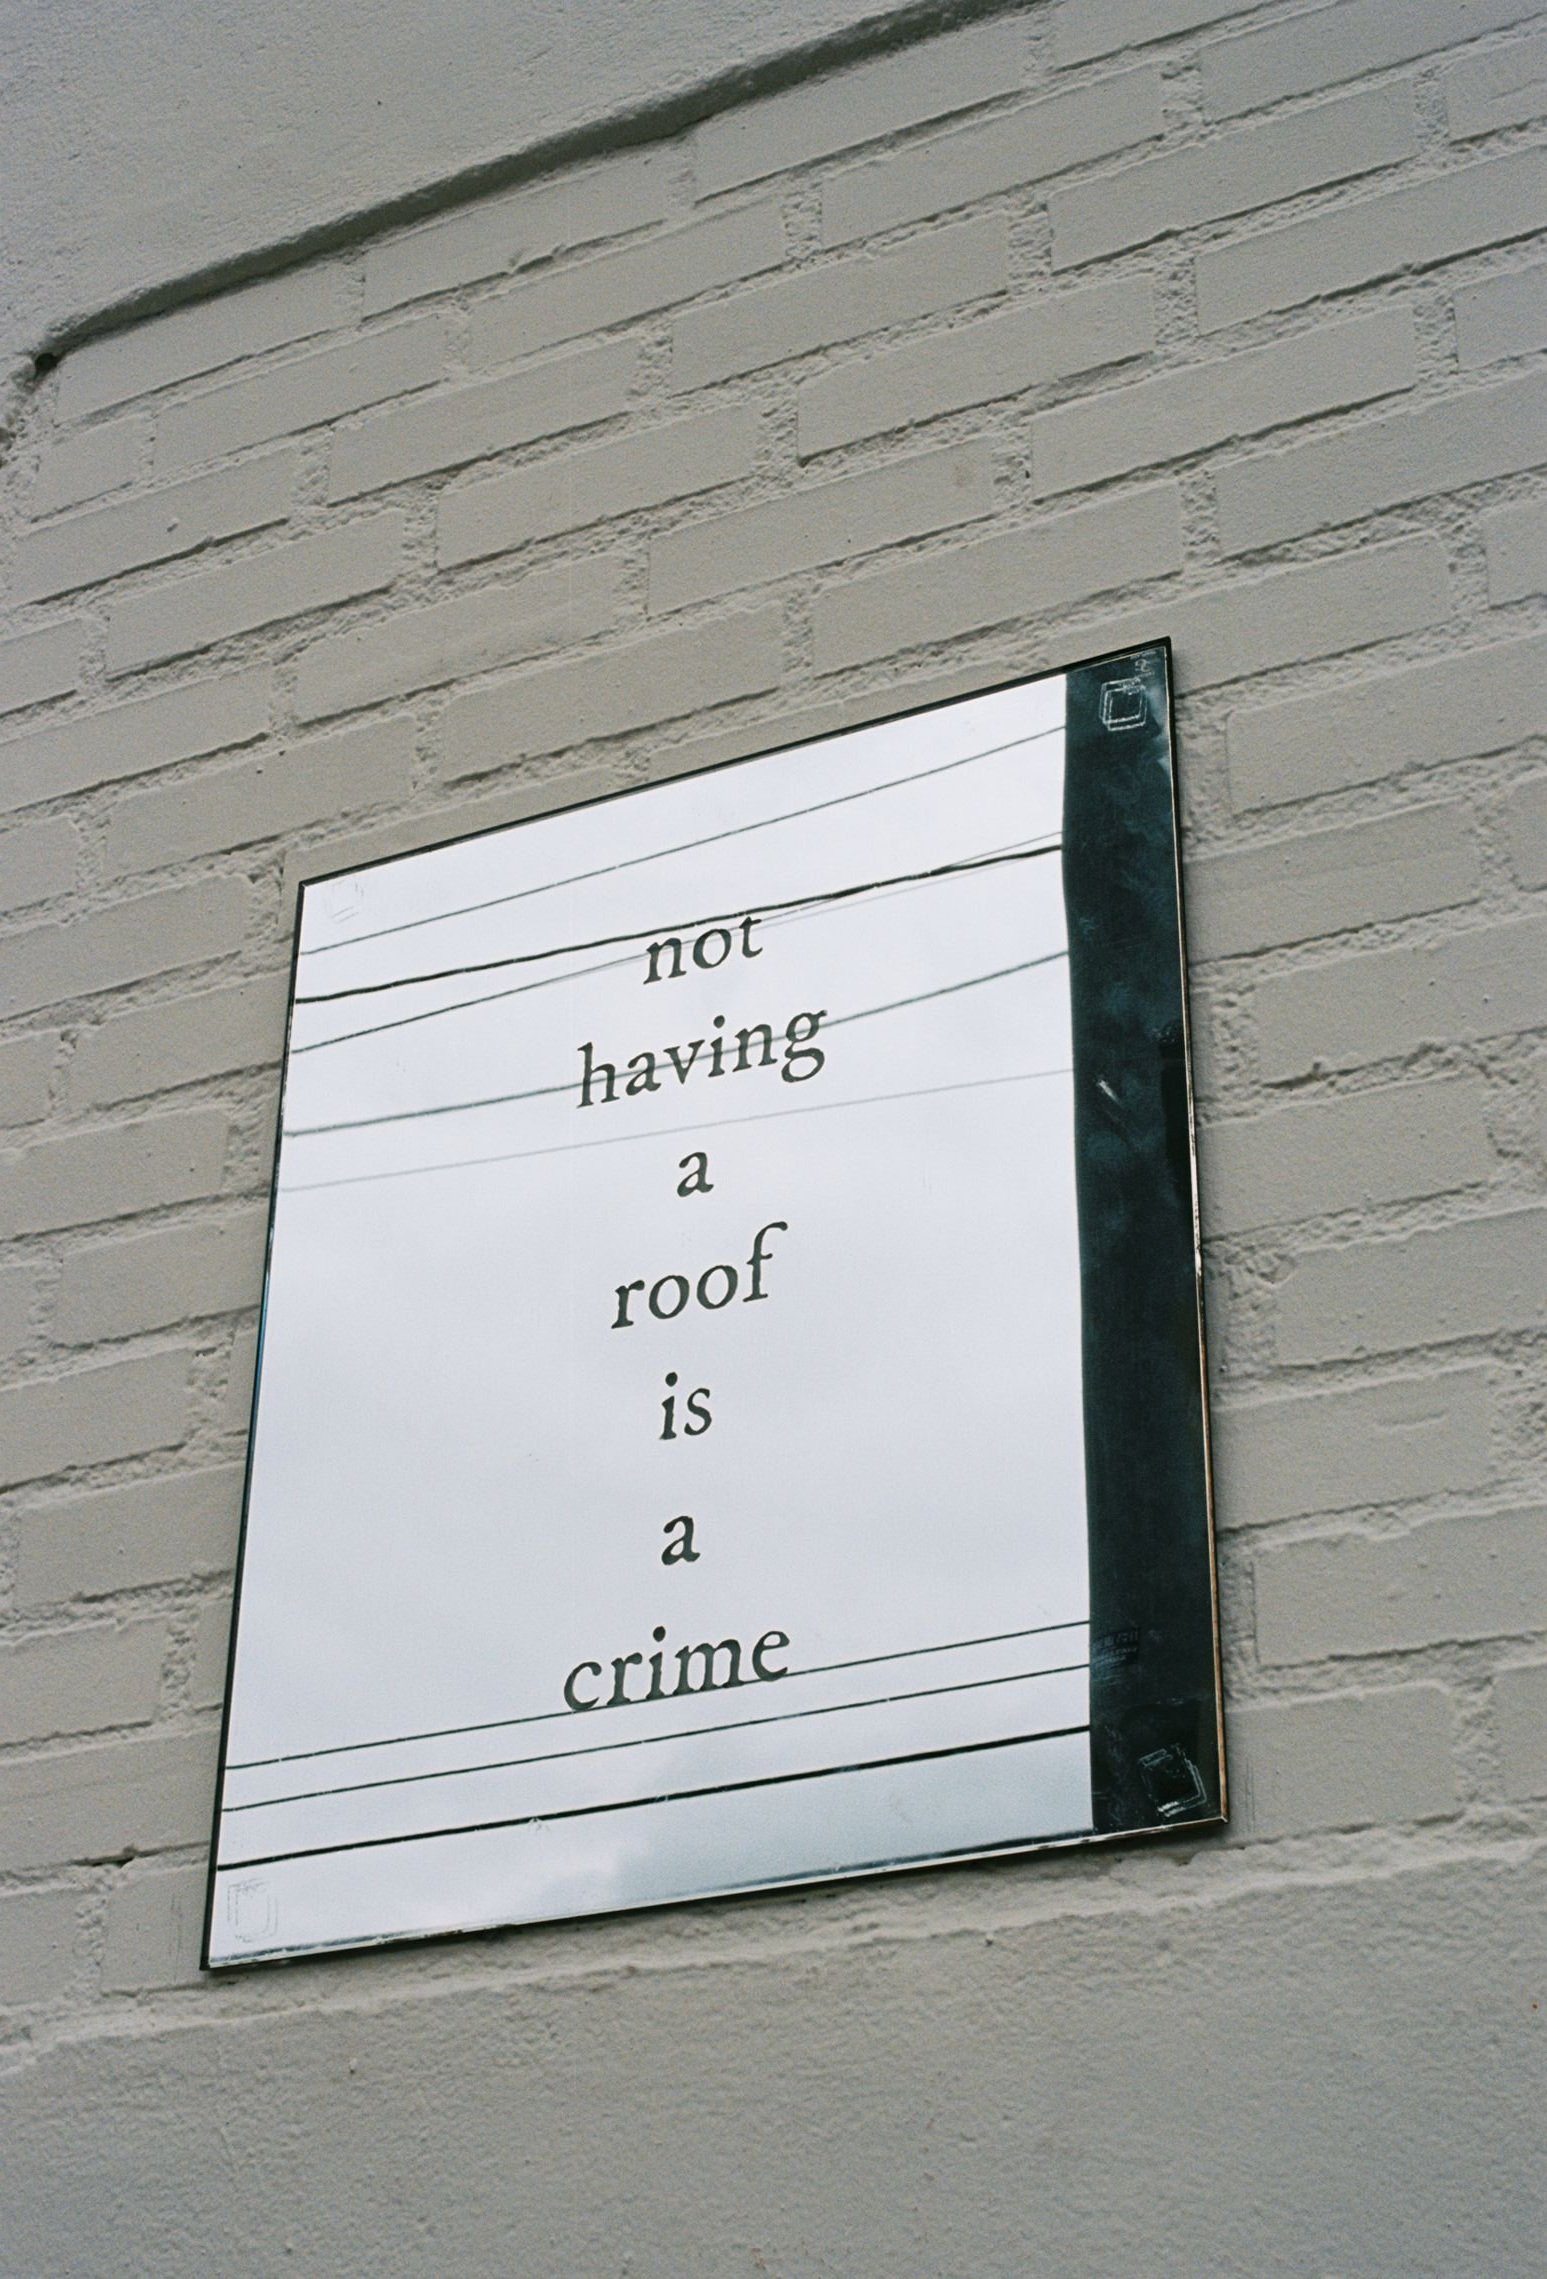 "not having a roof is a crime", Anderson St (Boyle Heights)